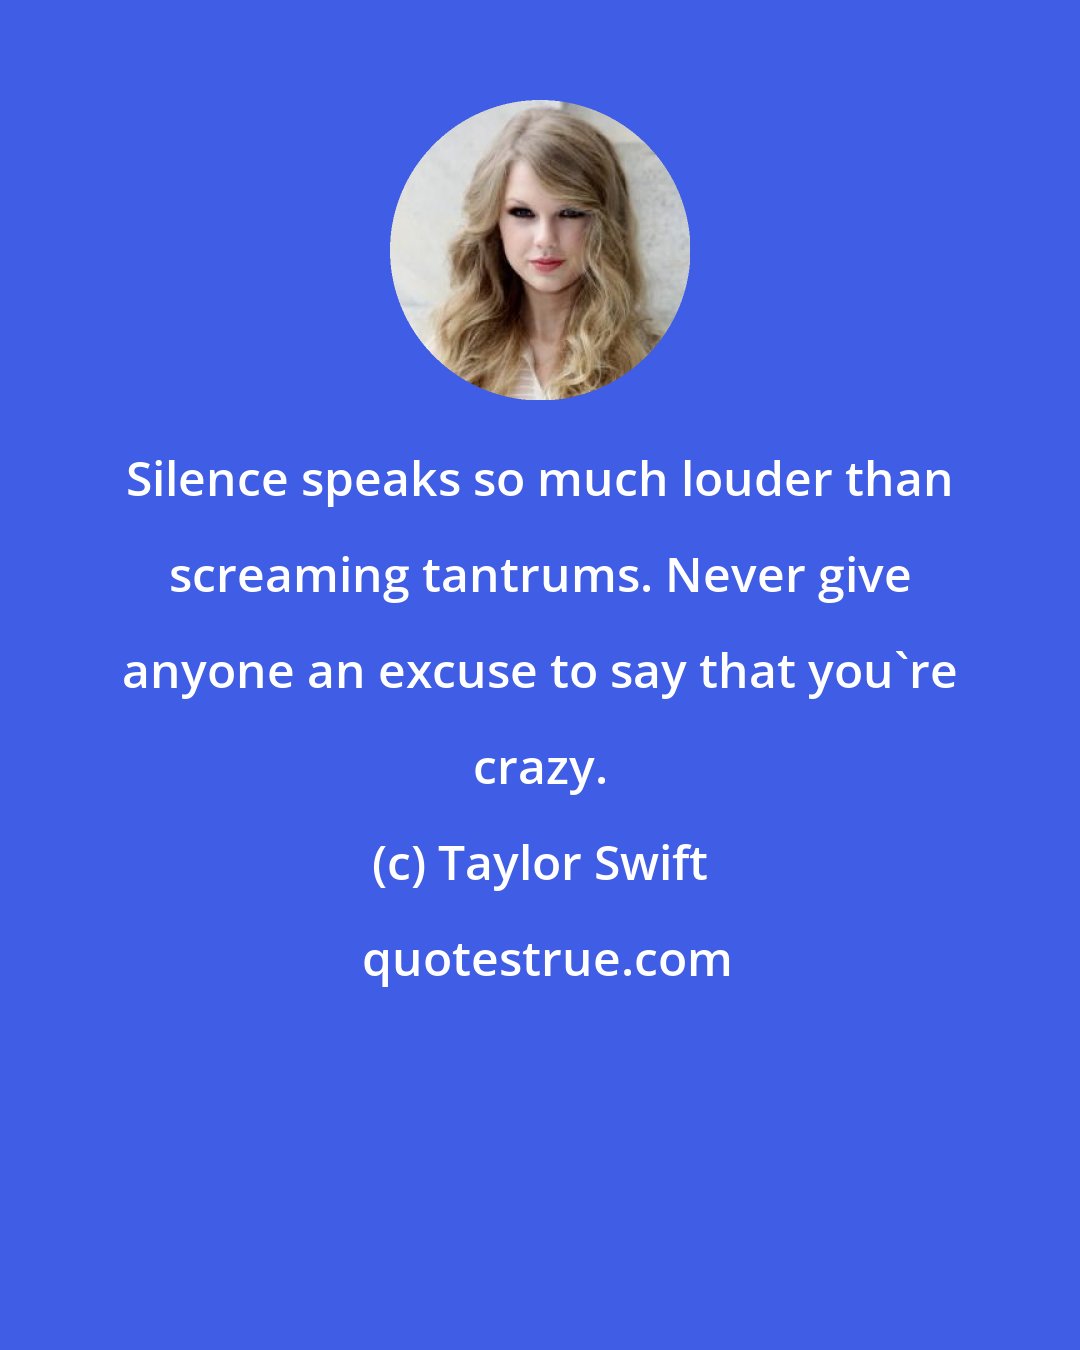 Taylor Swift: Silence speaks so much louder than screaming tantrums. Never give anyone an excuse to say that you're crazy.